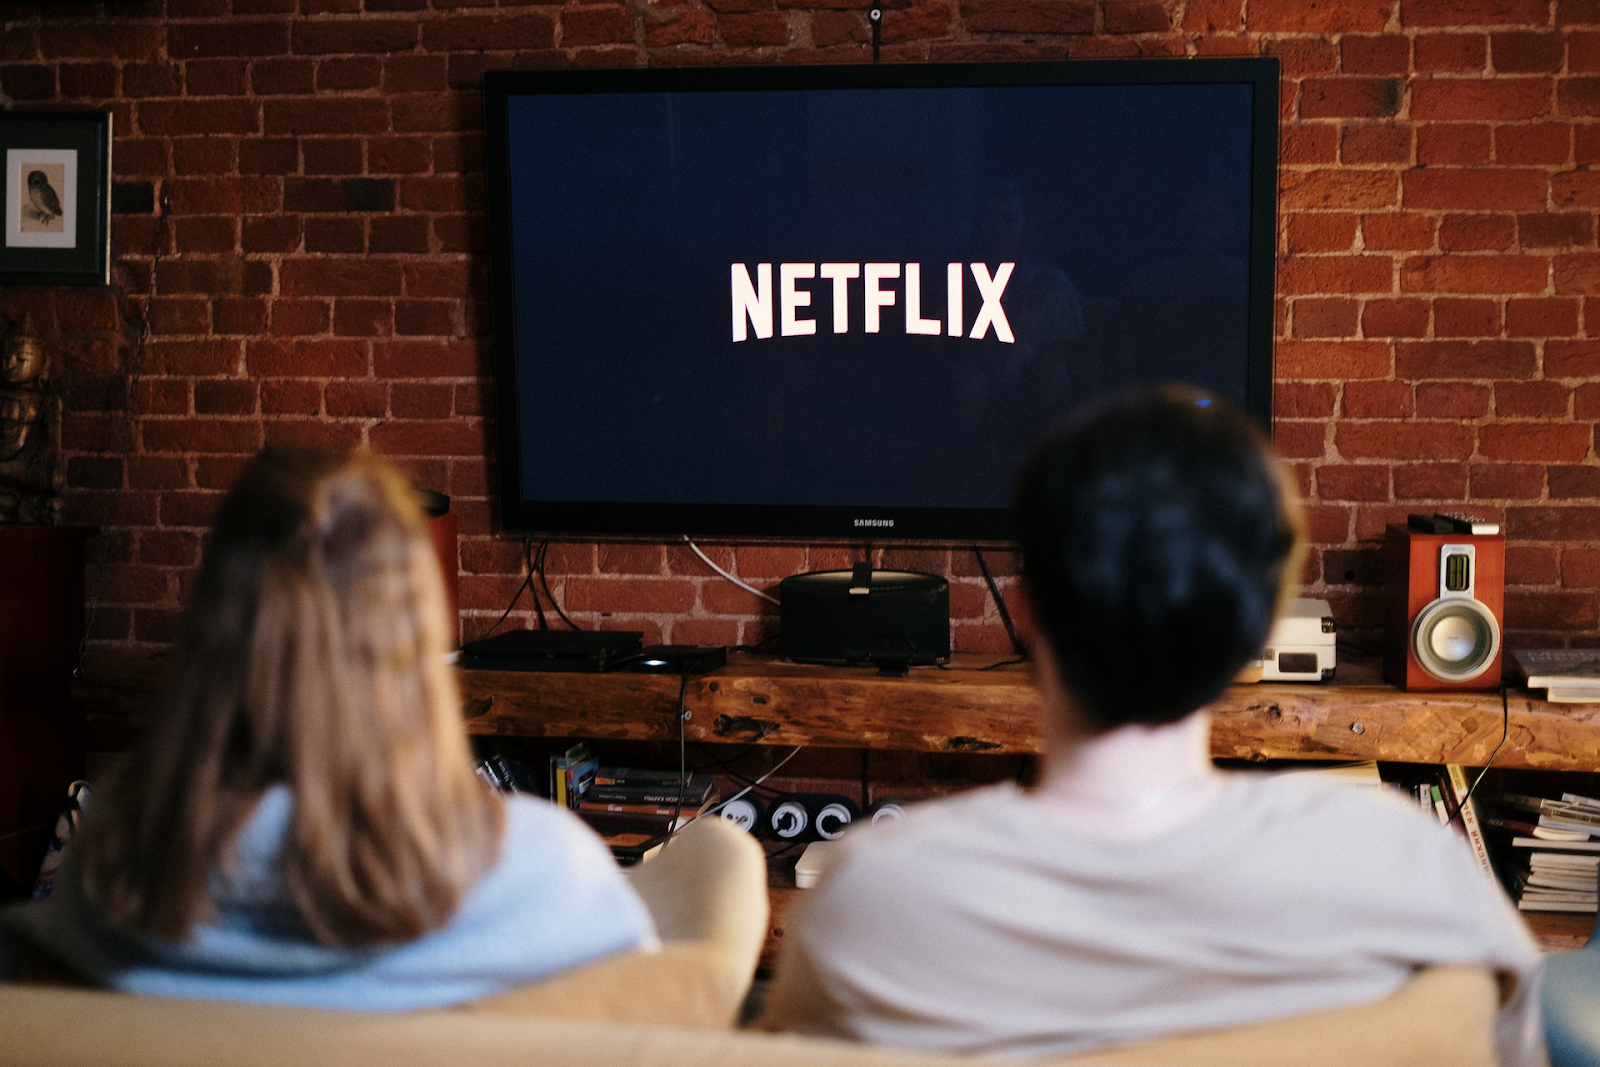 Companies like Netflix allow customers to cancel subscriptions any time